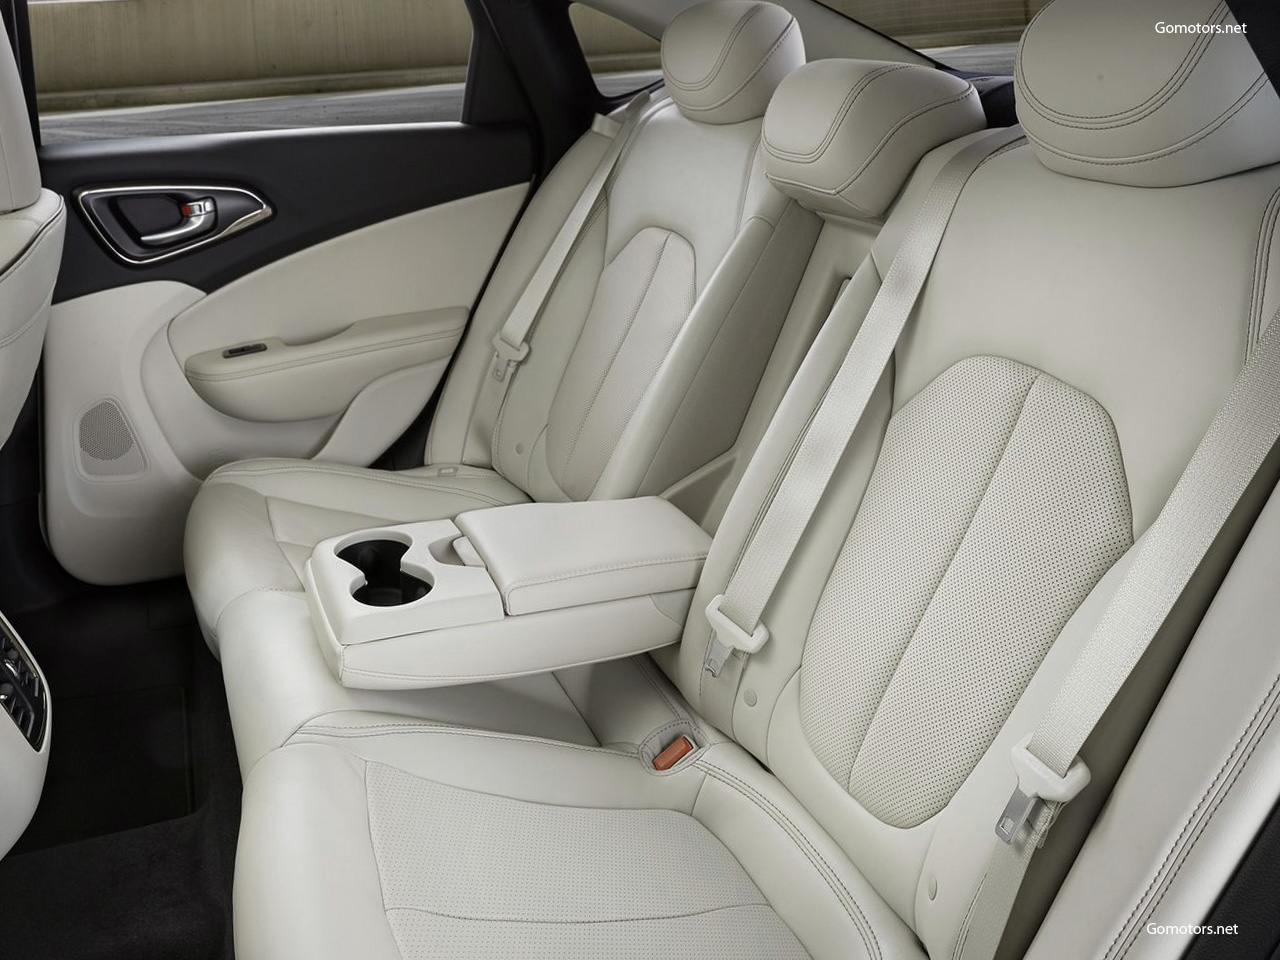 2015 Chrysler 200 interior:picture # 8 , reviews, news, specs, buy car